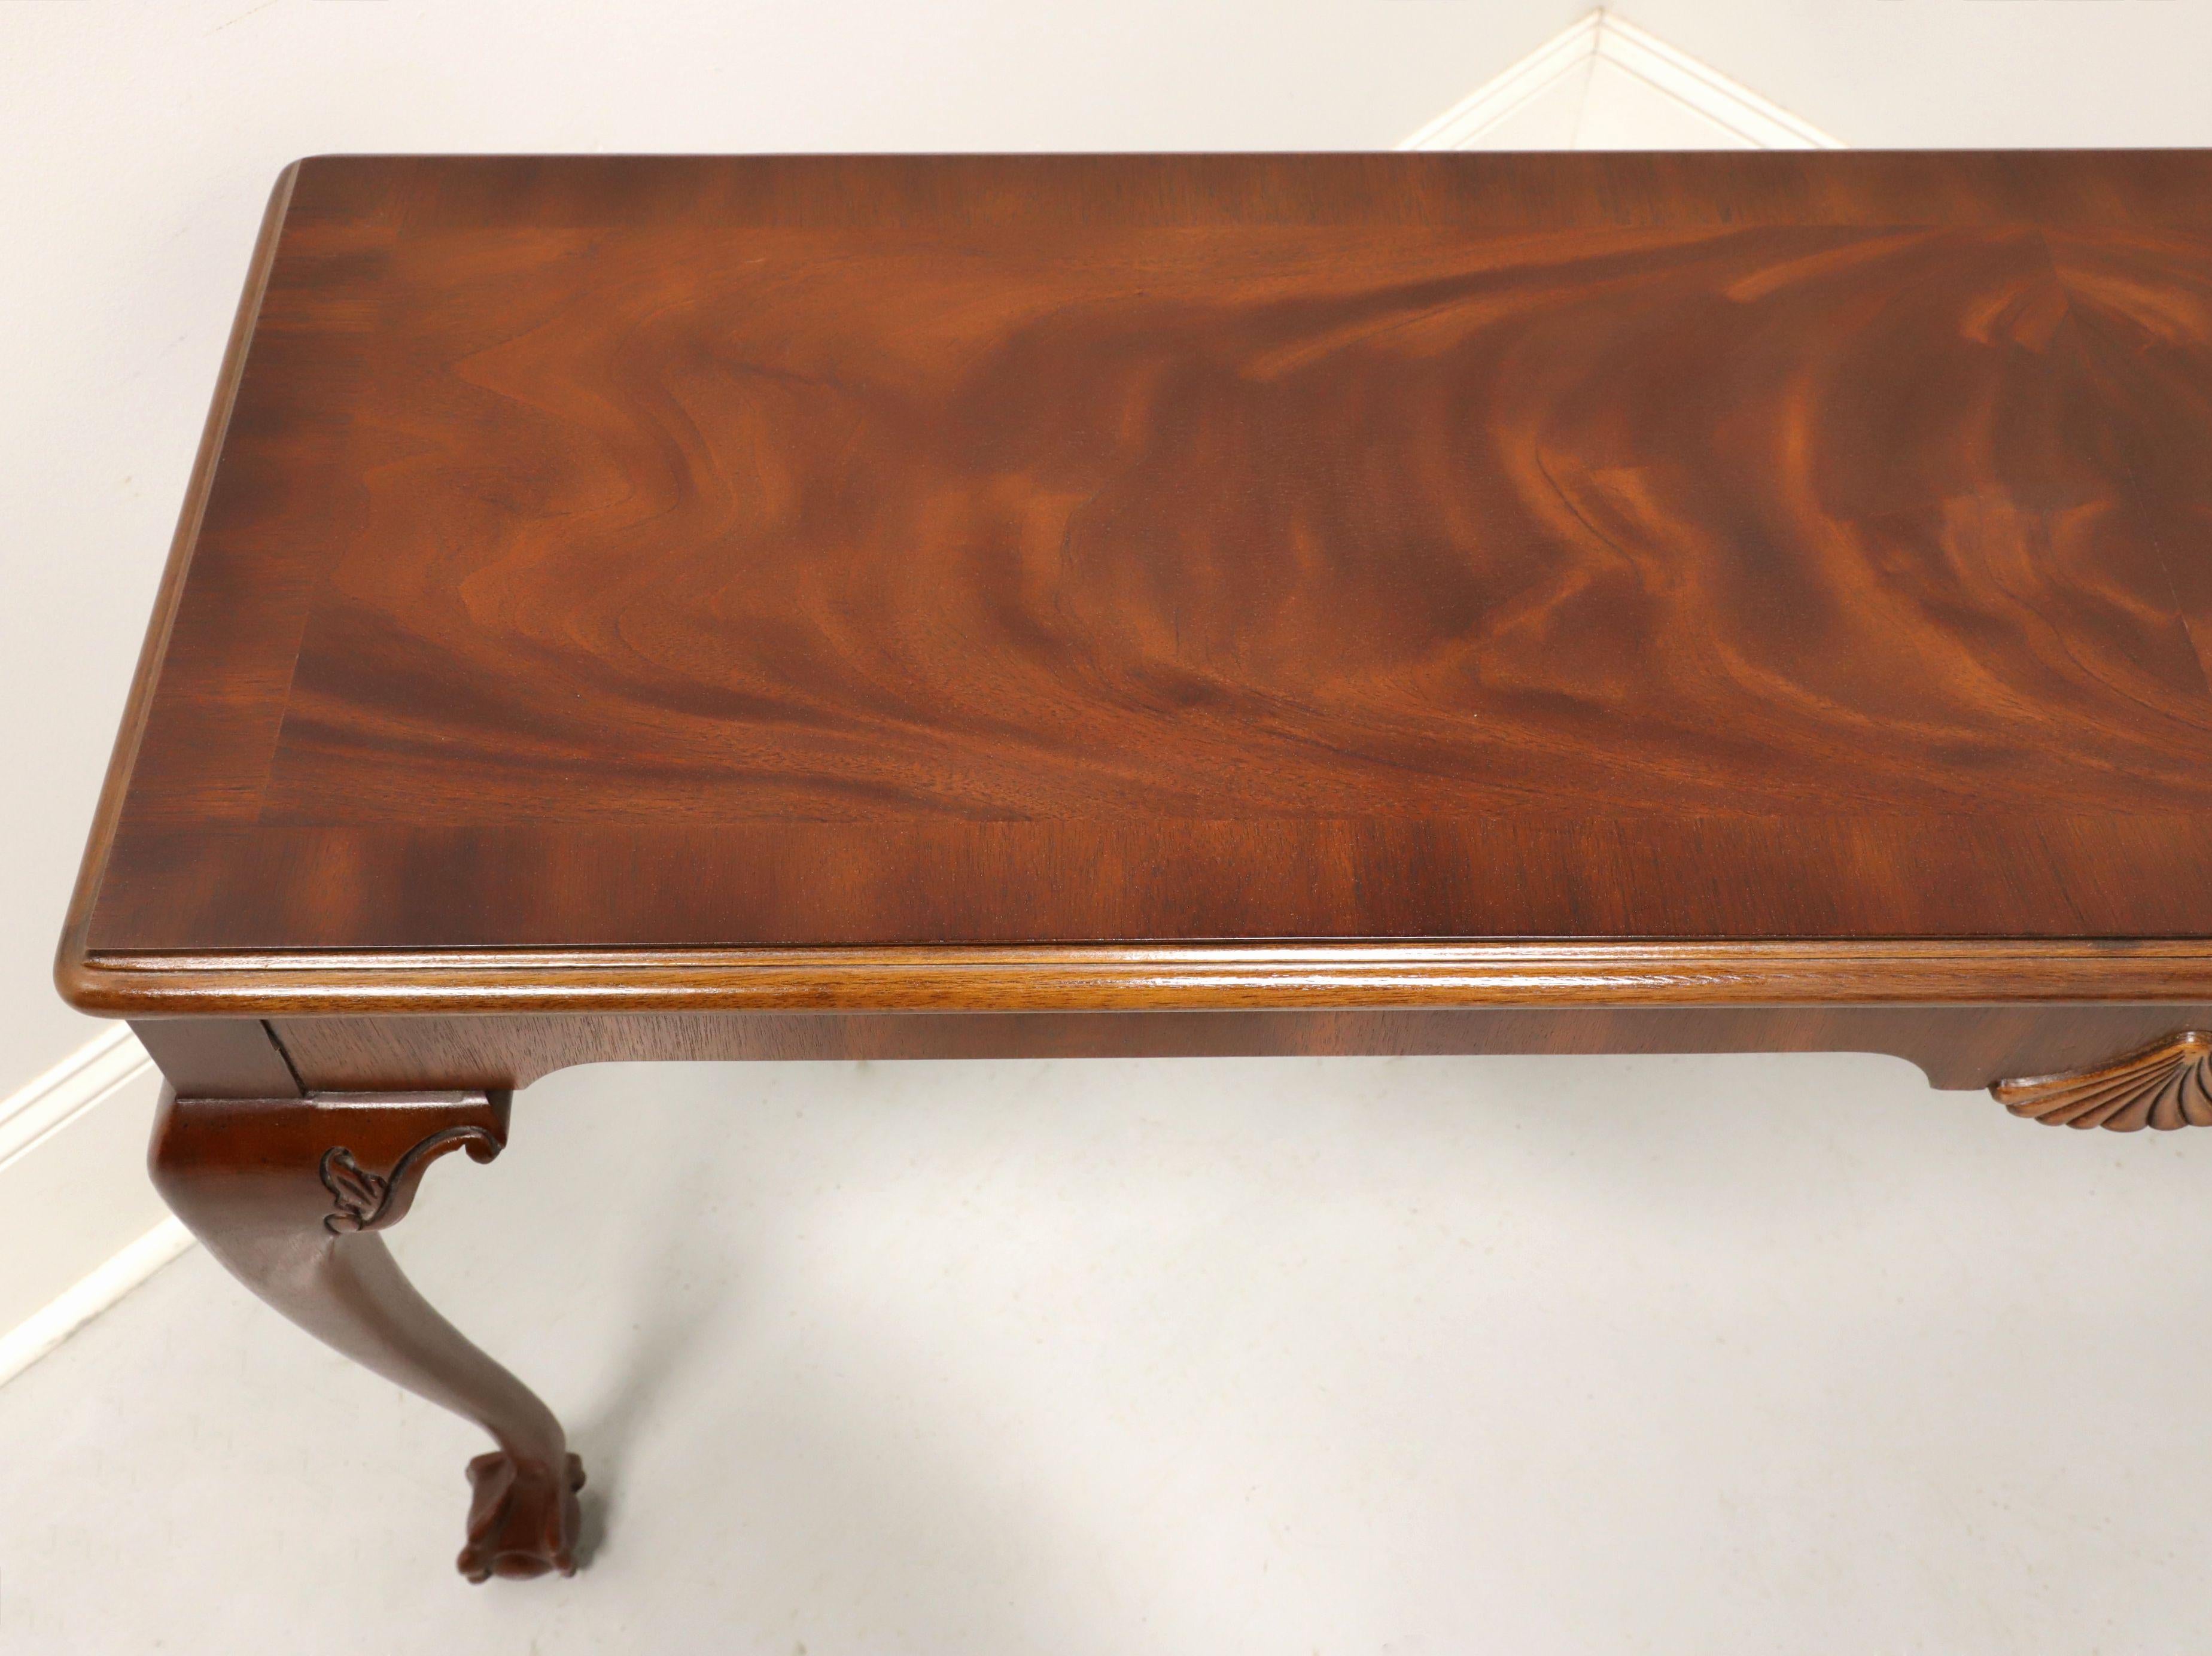 GORDON'S Late 20th Century Flame Mahogany Chippendale Console Sofa Table In Good Condition For Sale In Charlotte, NC